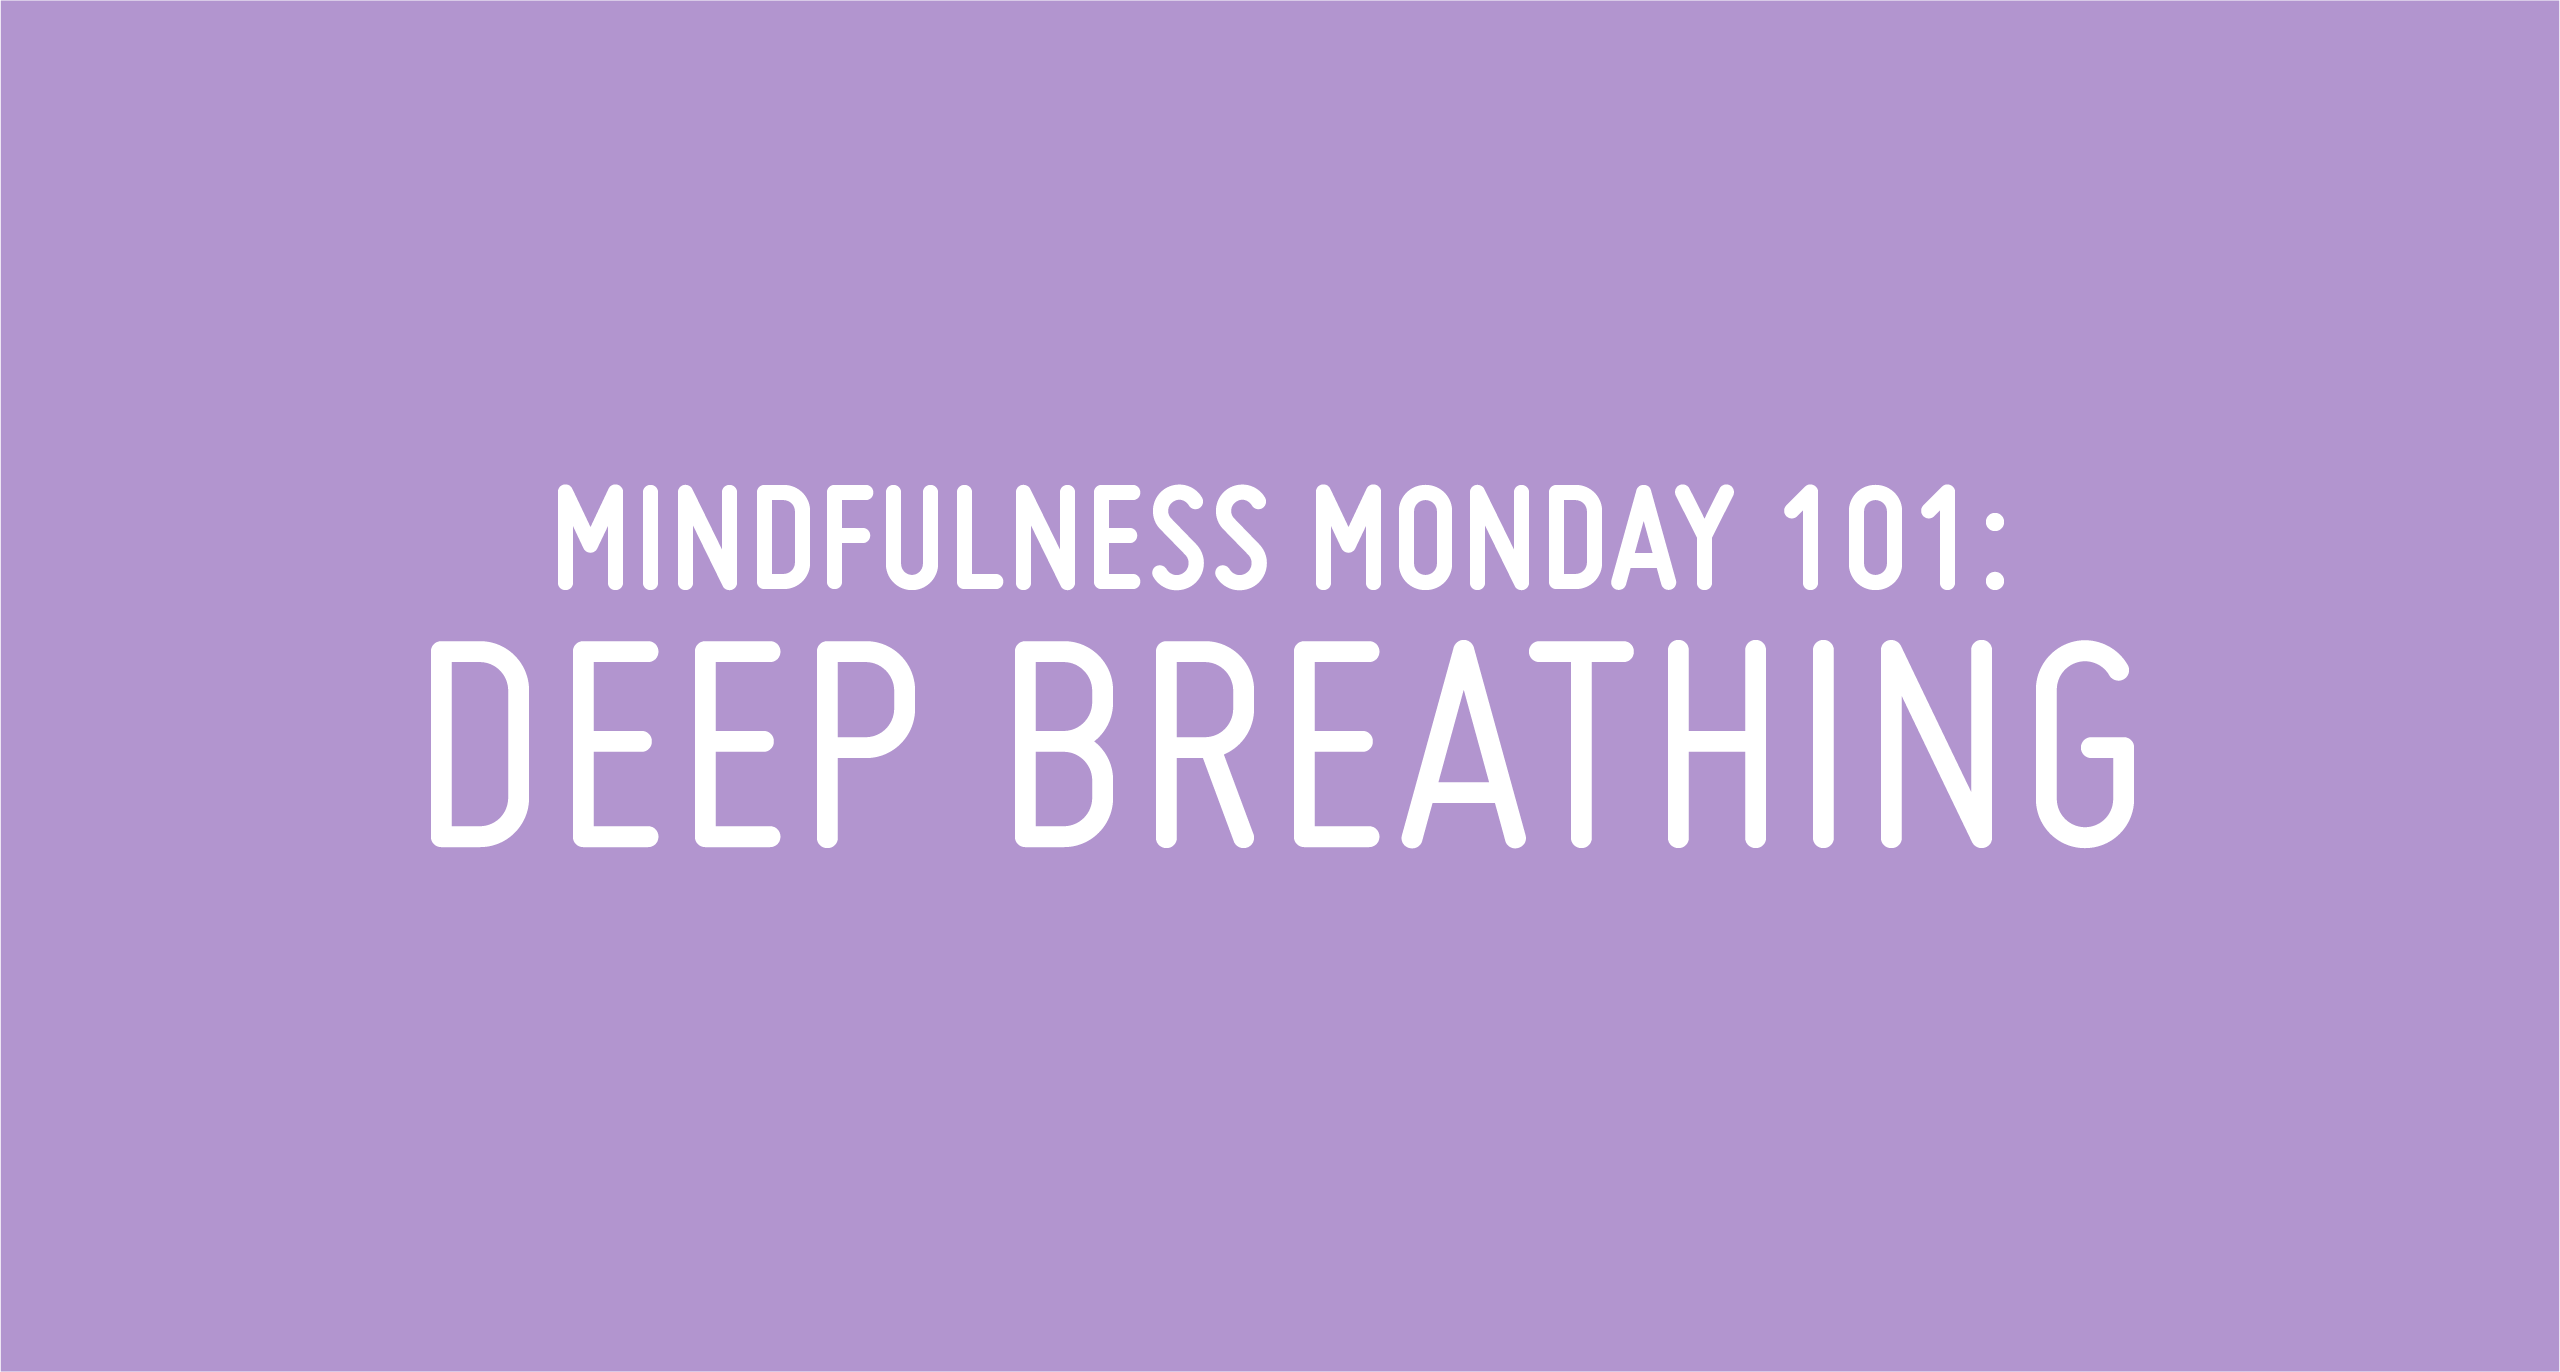 DeStress Monday Intro to Deep Breathing for Stress Relief